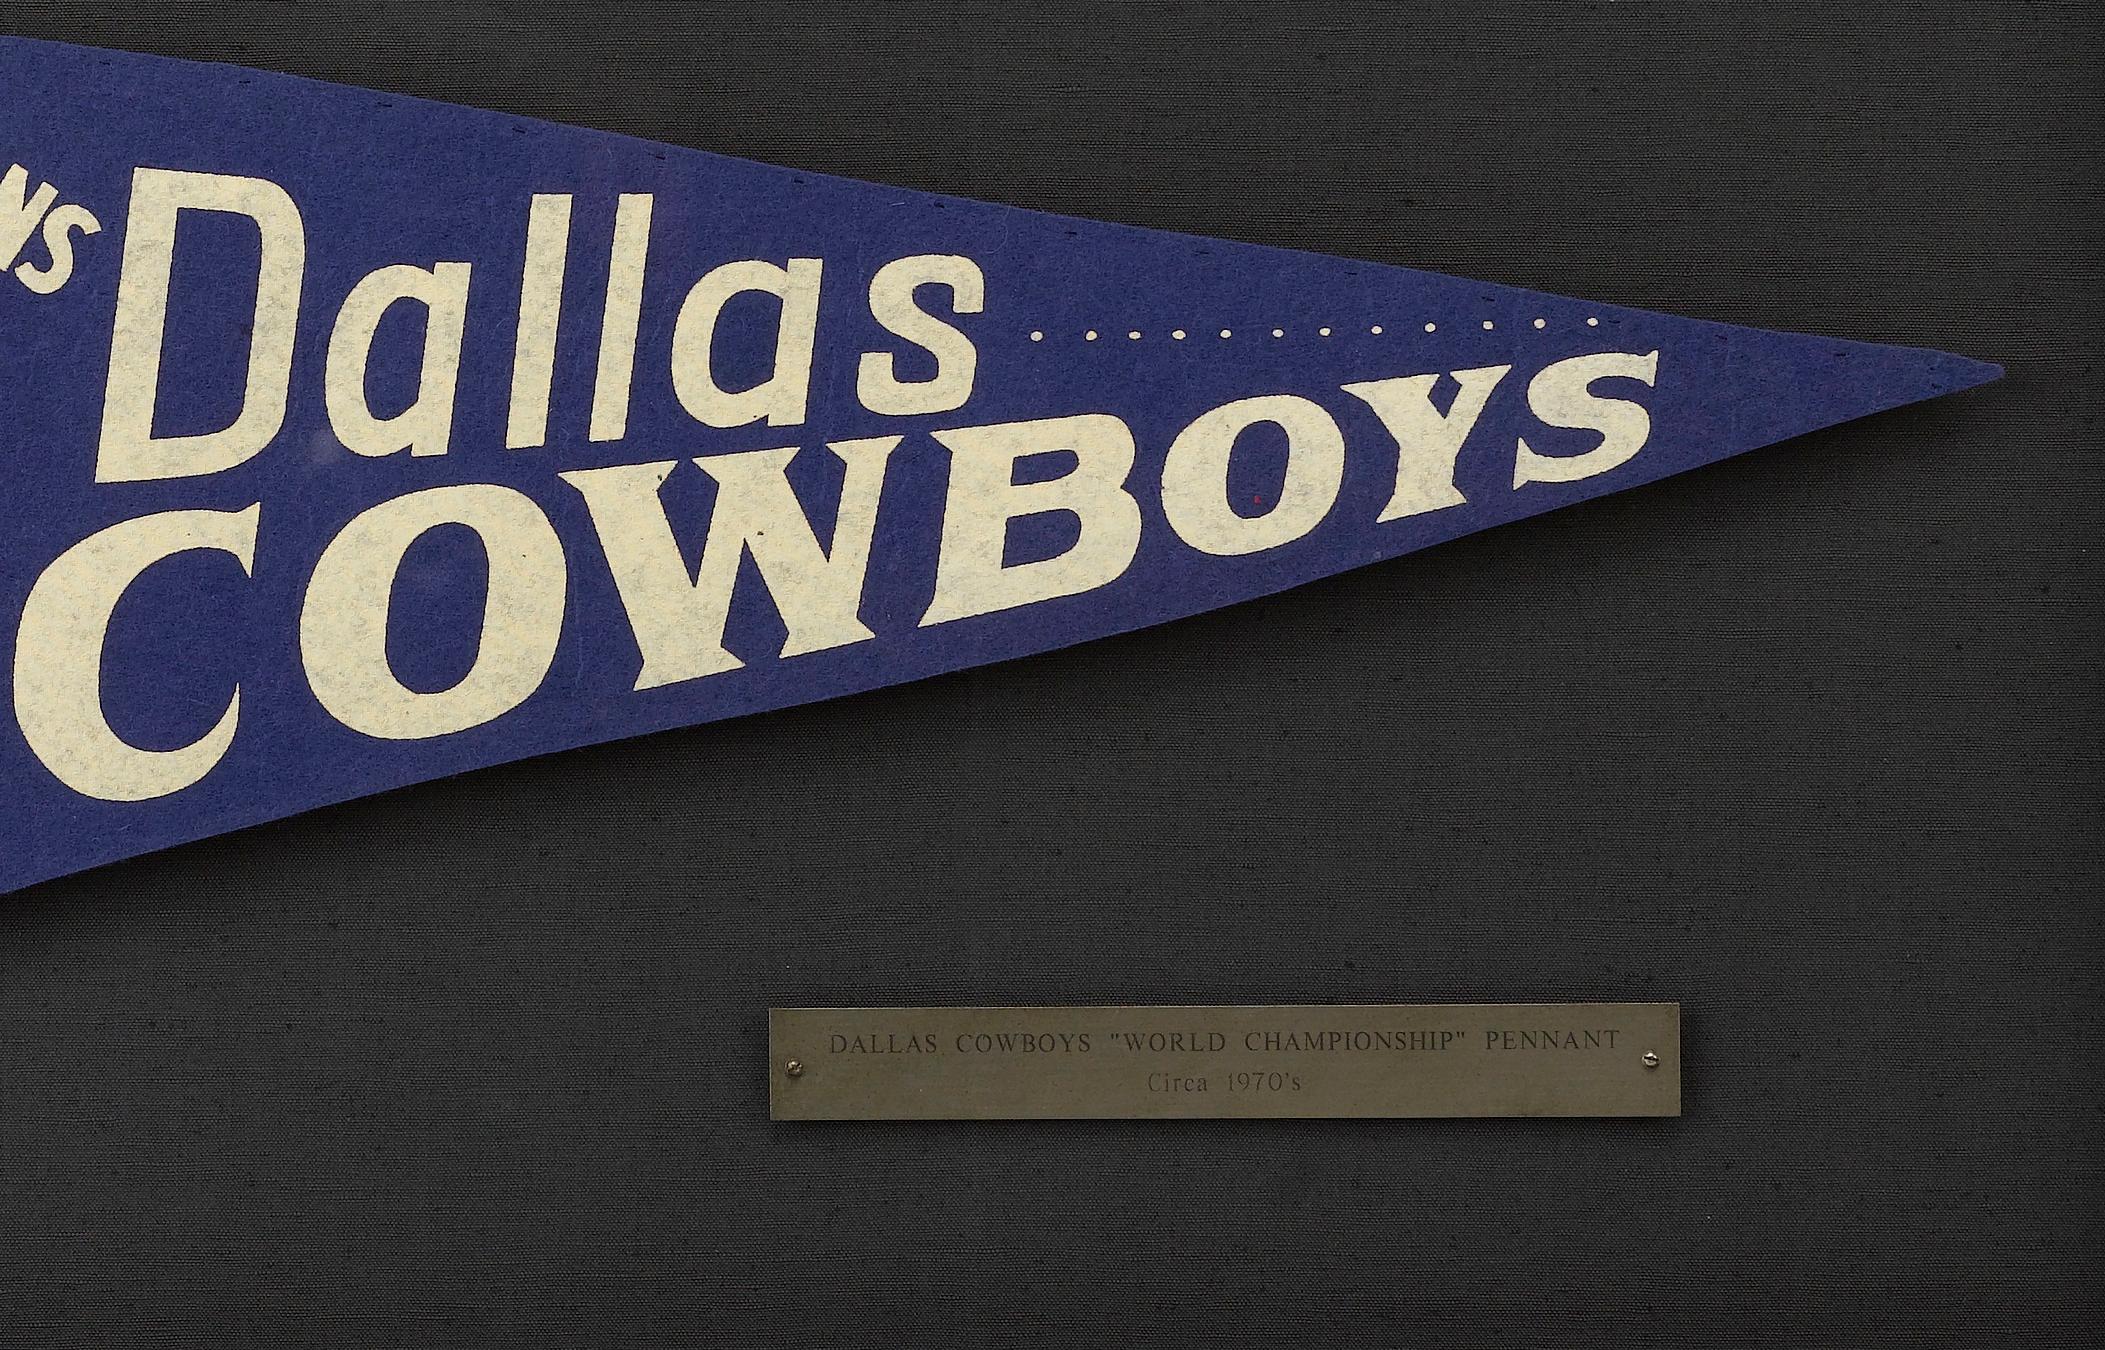 This is a rare, hard to find vintage NFL Dallas Cowboys pennant. A blue felt pennant, this design features Cowboy Joe and the text 